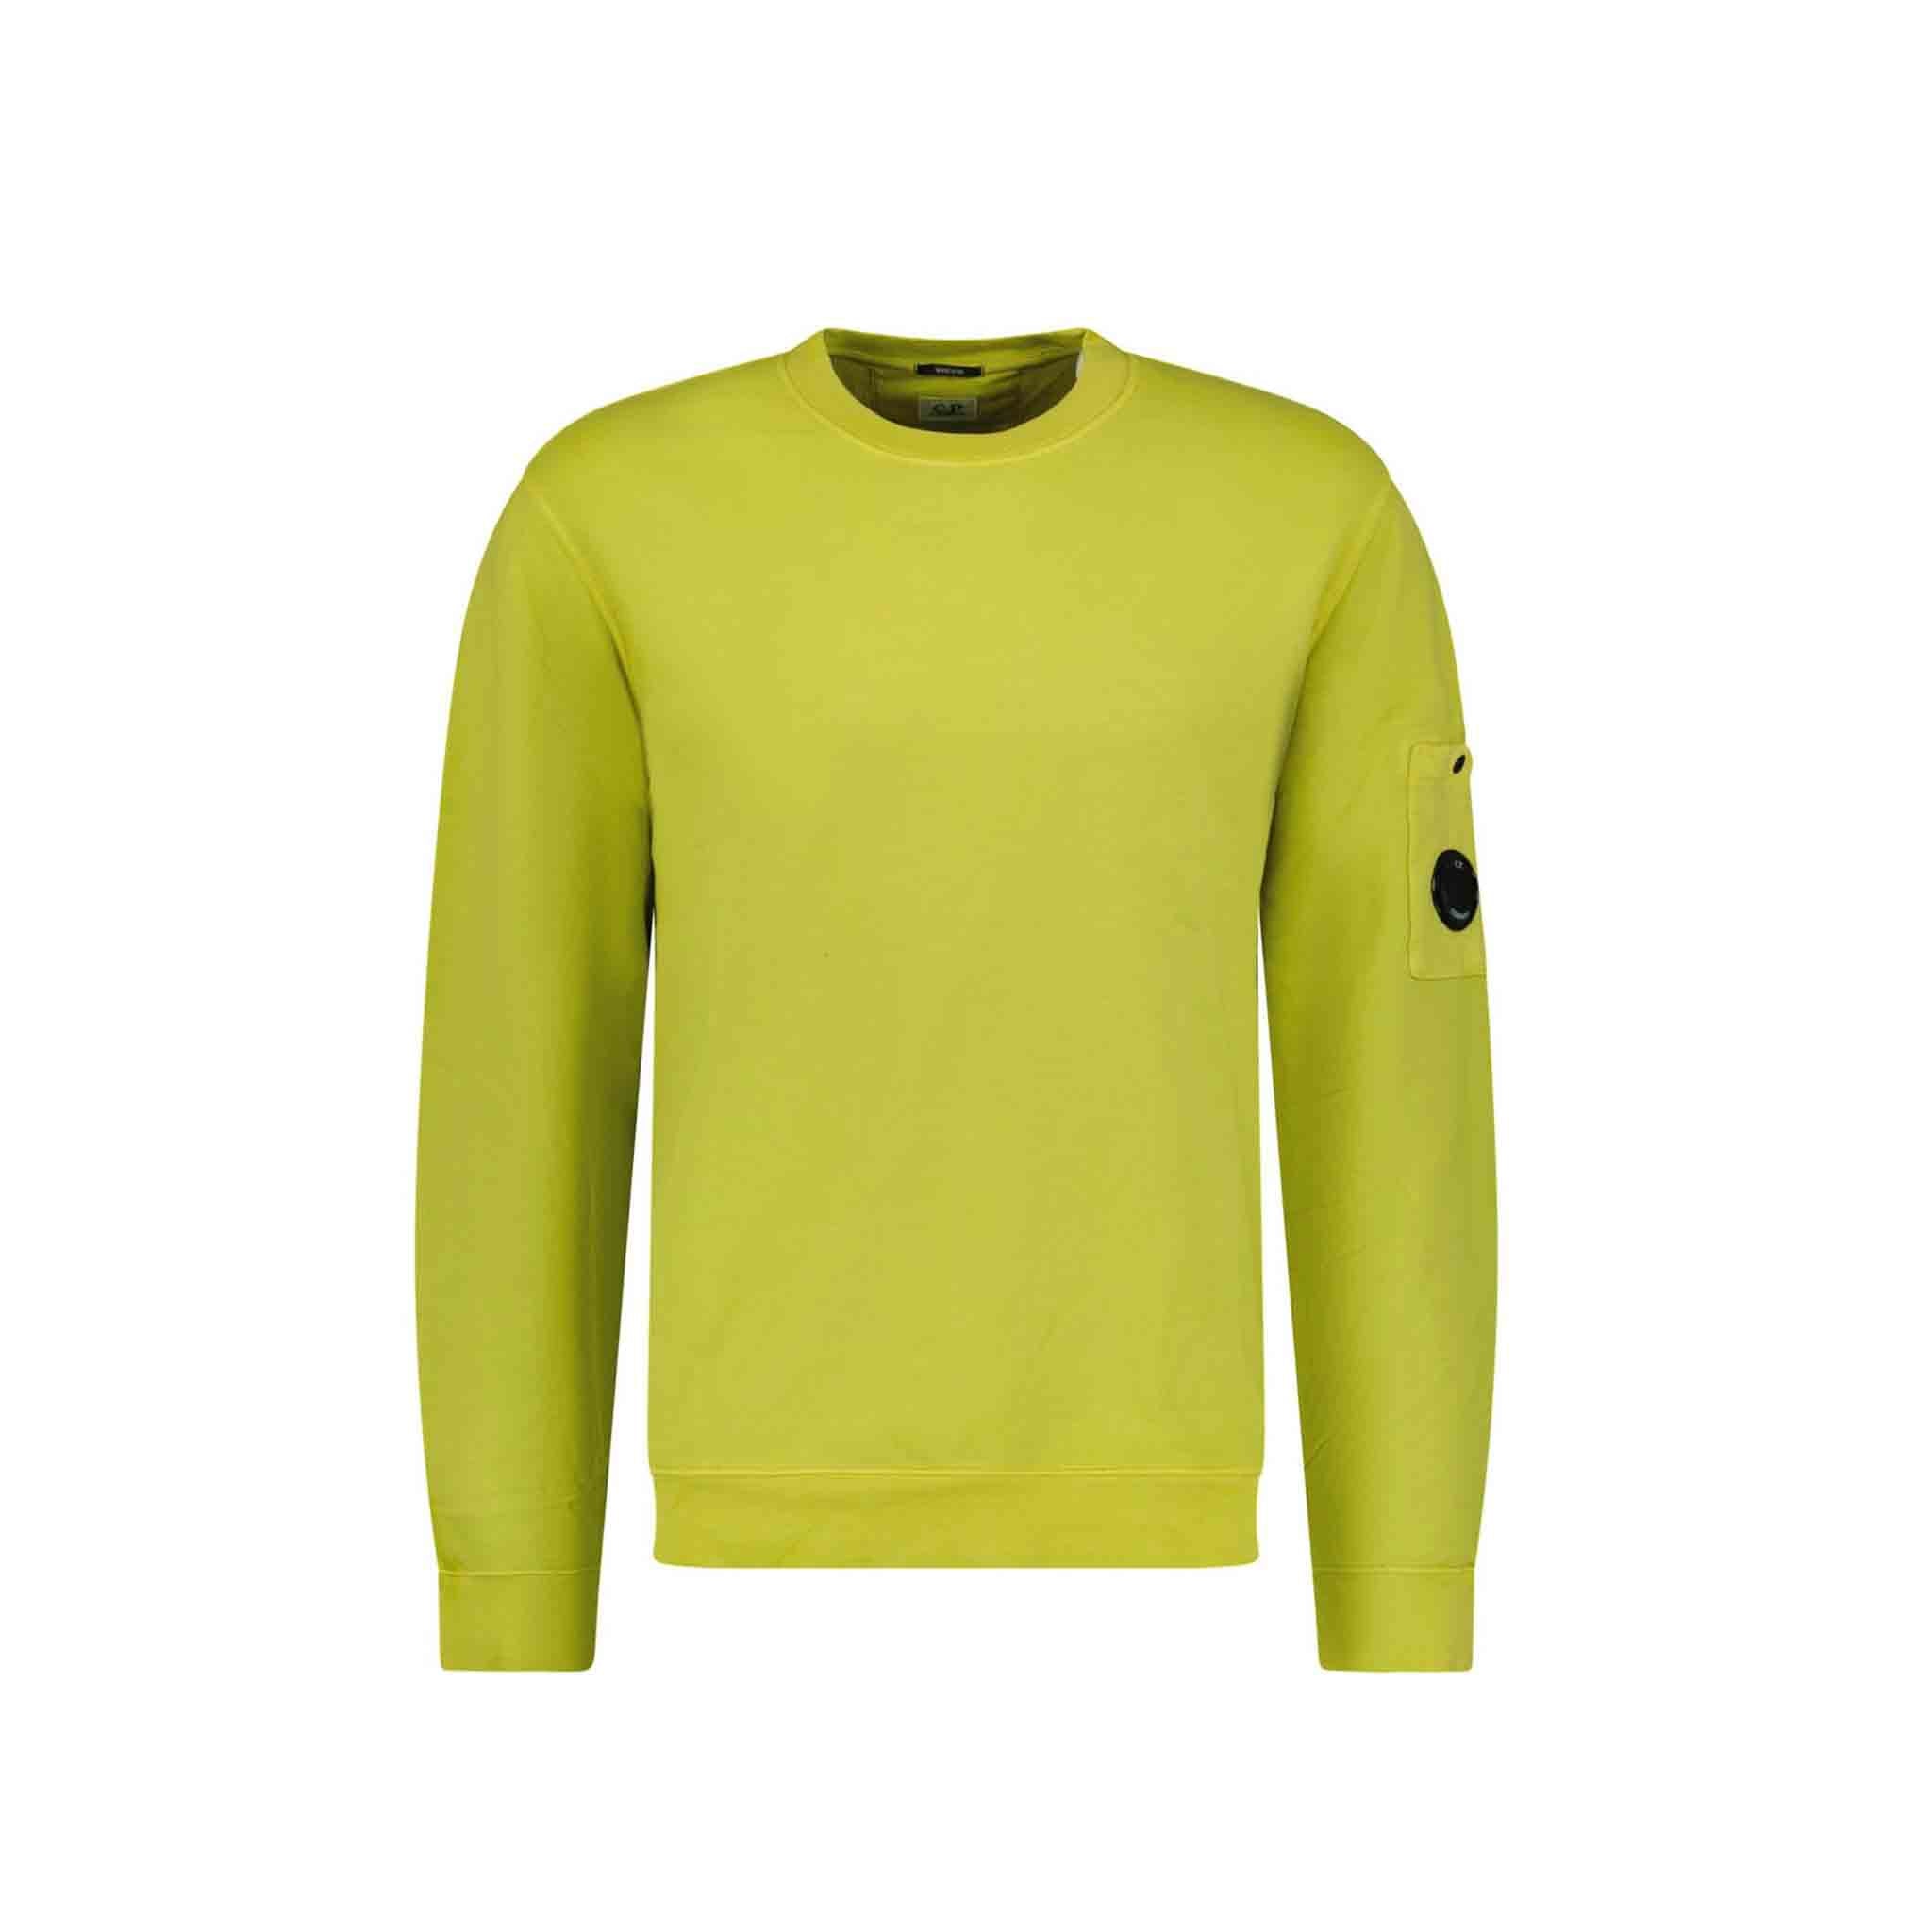 C.P. Company Resist Dyed Sweatshirt in Lime Green